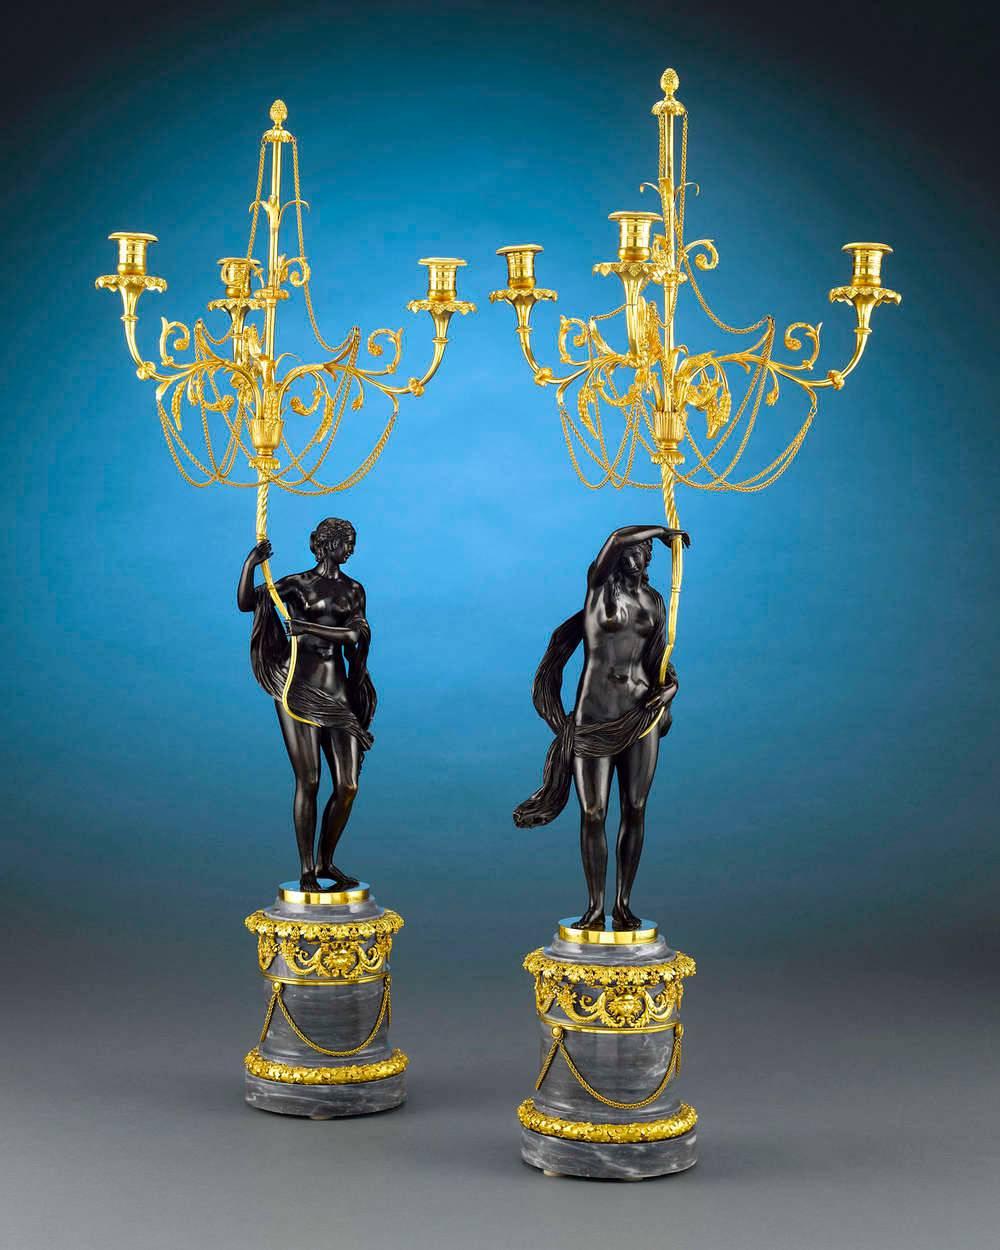 The epitome of Russian craftsmanship, this majestic and incredibly rare pair of candelabra would have been fit for the Czar. These superb Louis XVI style figural bronze candelabra were created in the Neoclassical taste that permeated Russia during